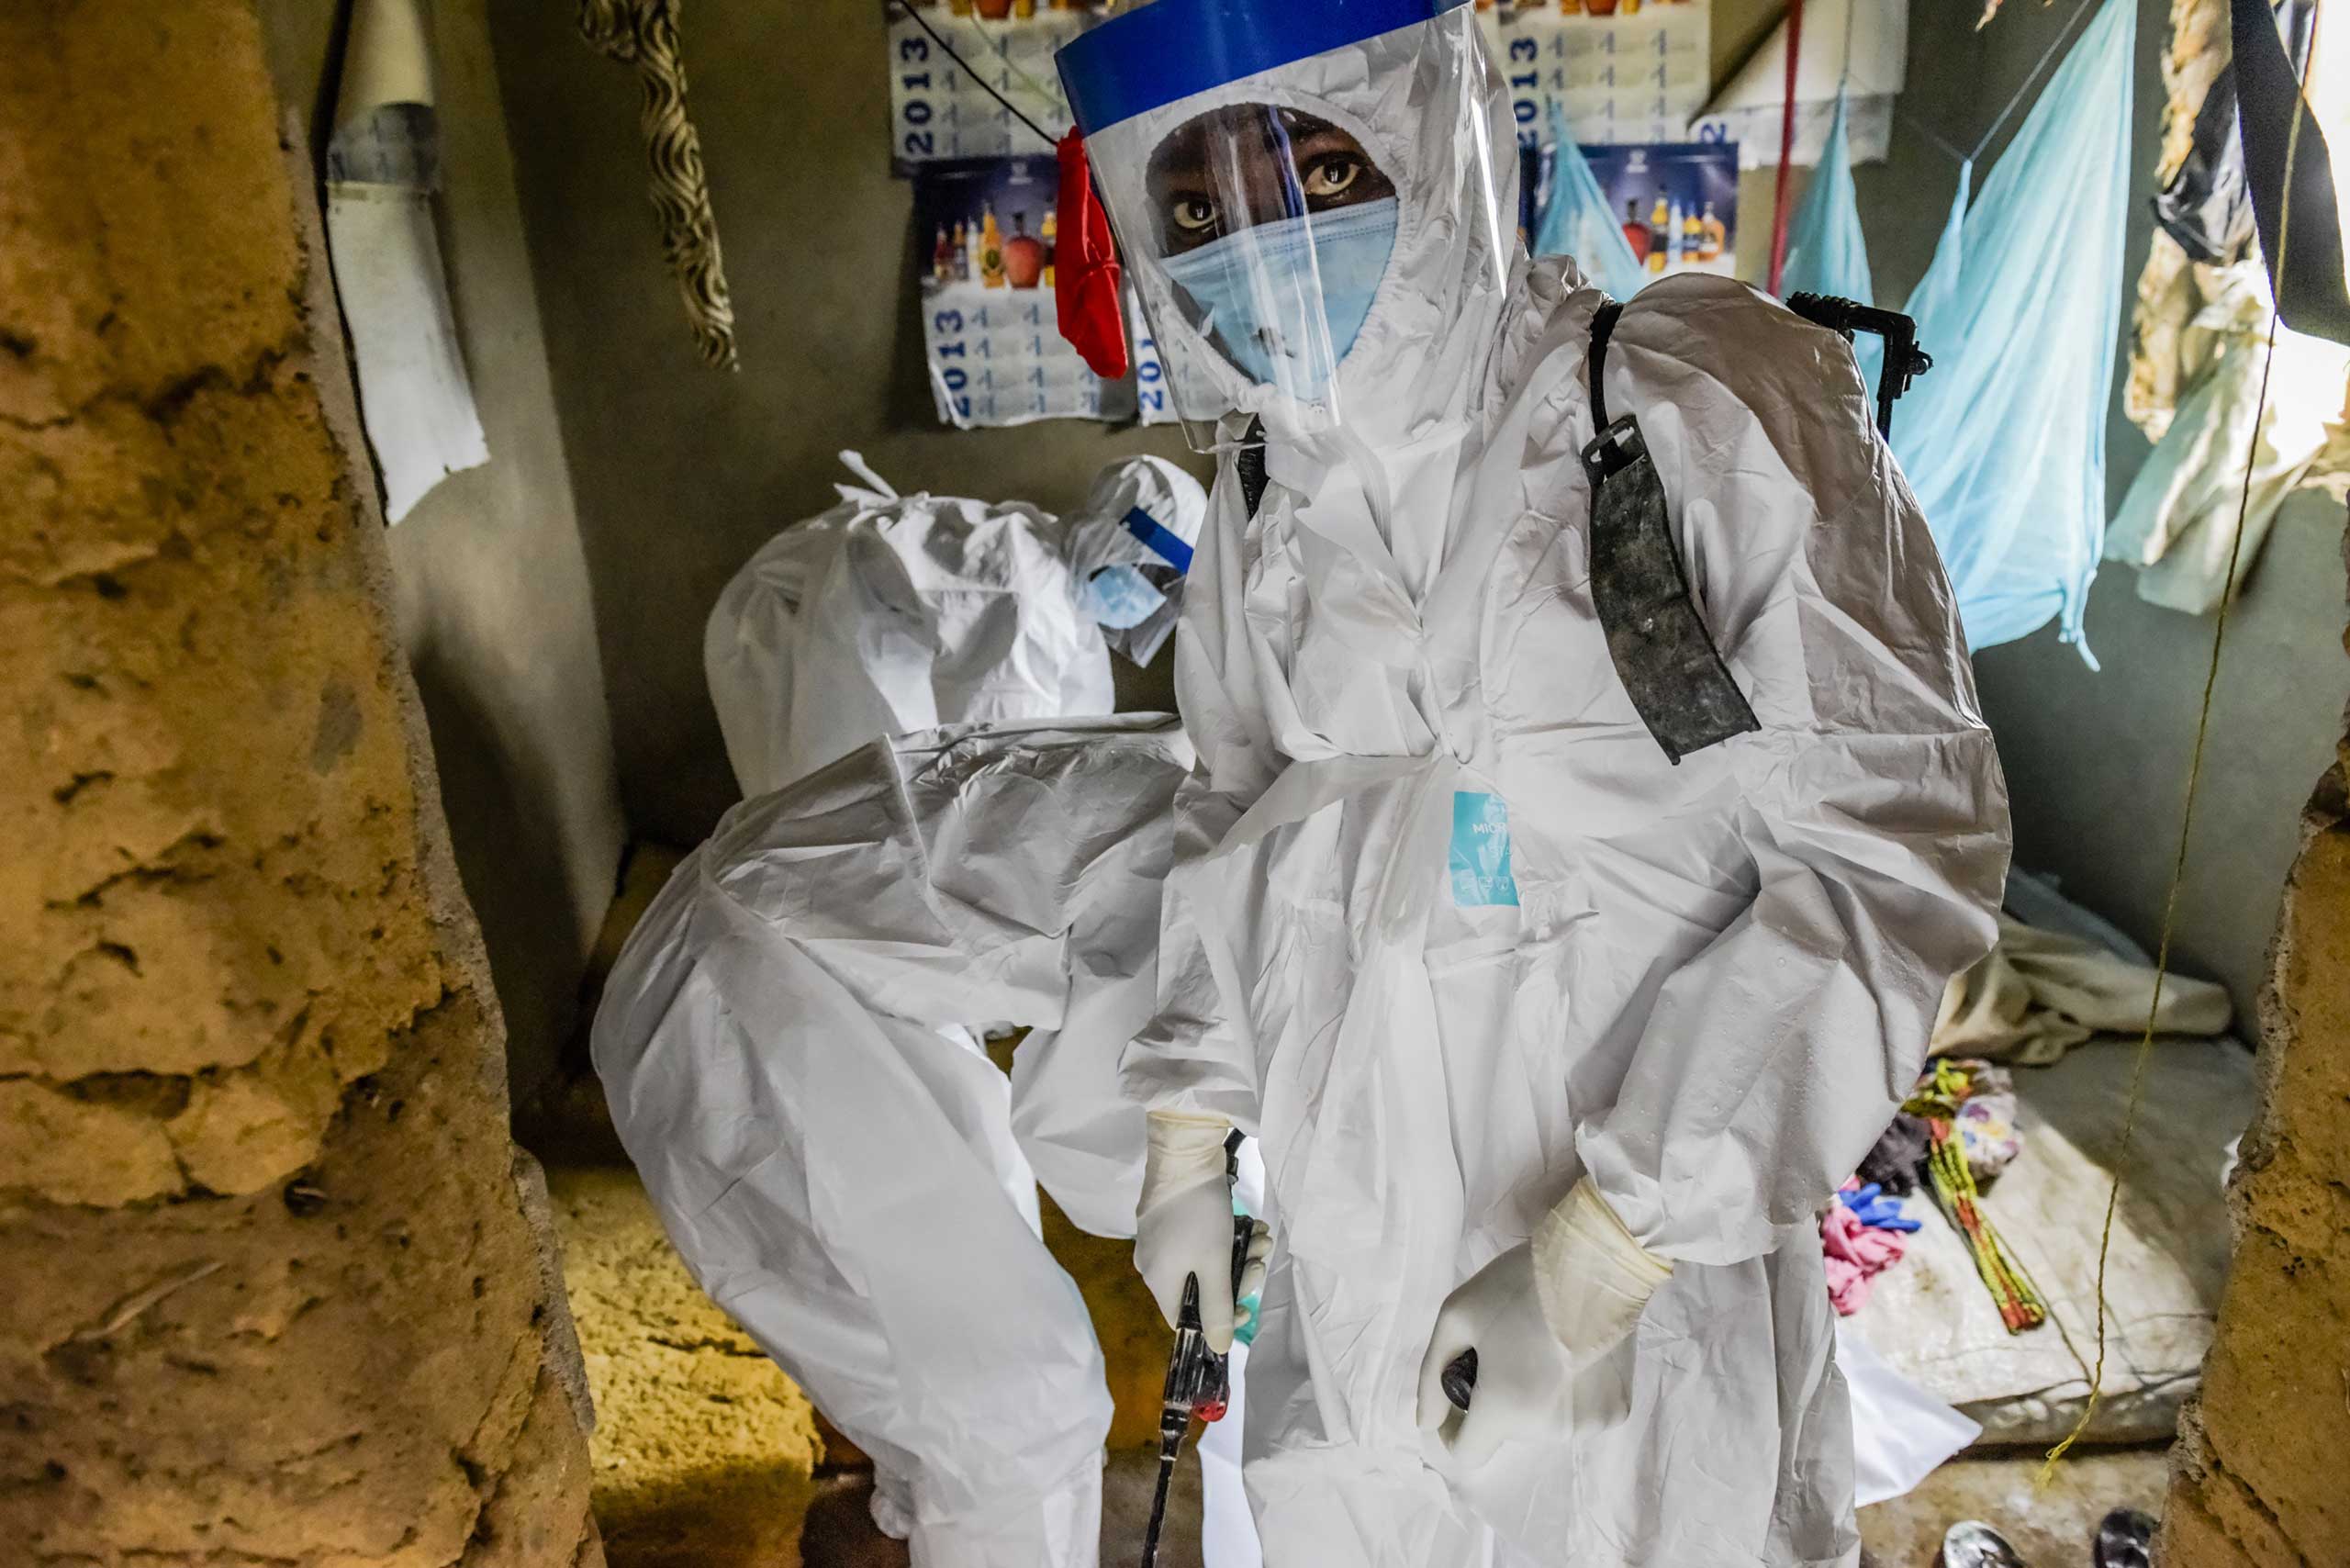 A burial team extracts the body of Isatu Sesay, 16, an Ebola victim, from her home in Kissi Town, Sierra Leone, Nov. 22, 2014. (Daniel Berehulak—The New York Times/Redux)